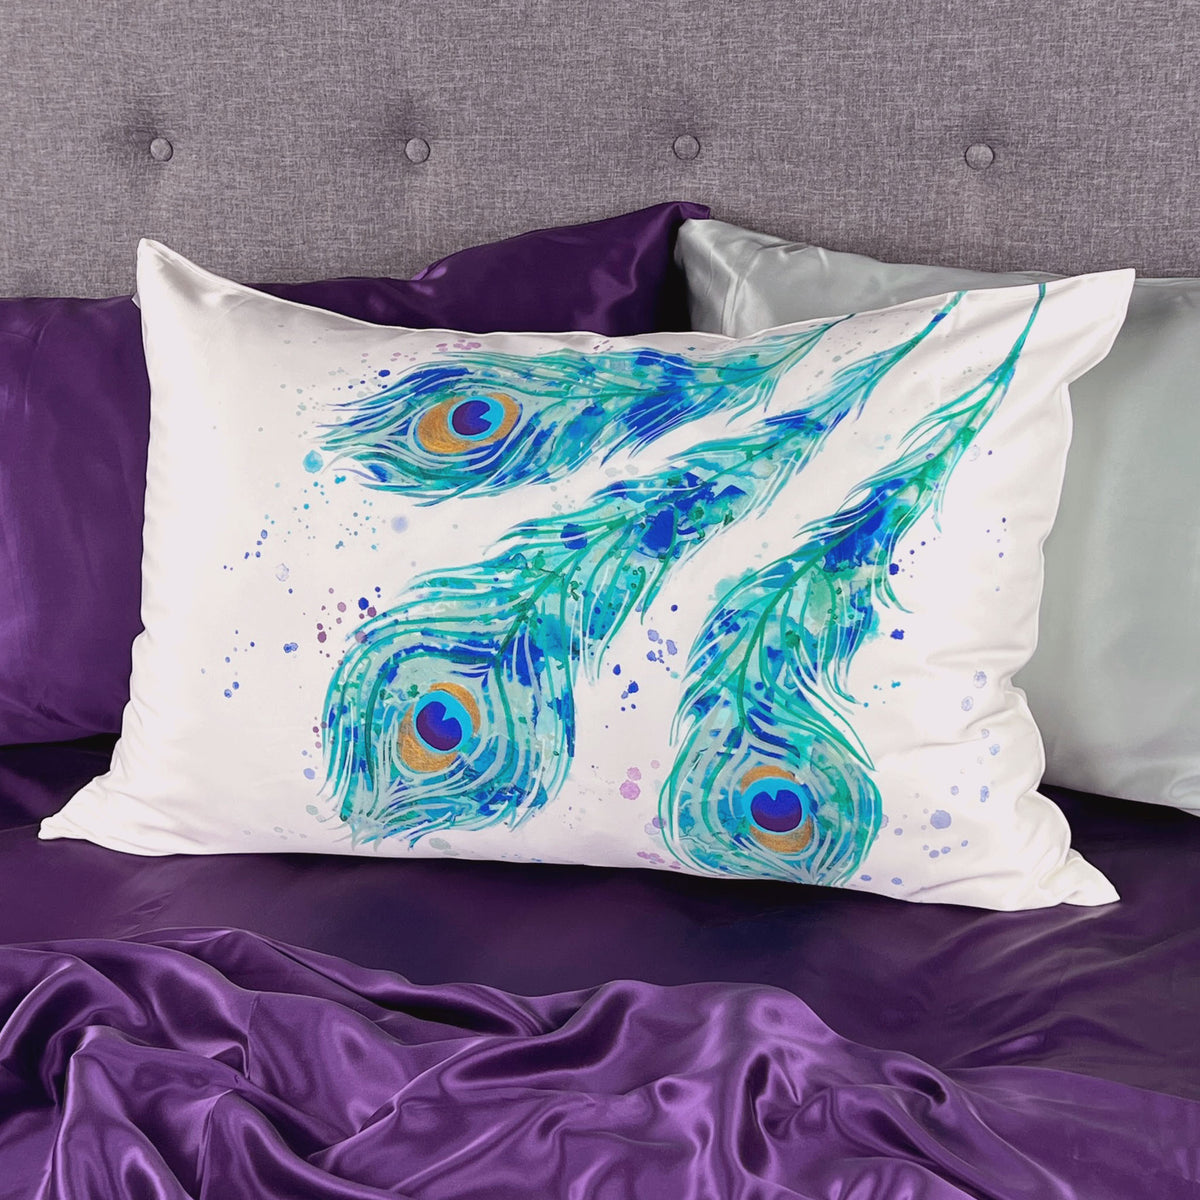 Gallery Collection Silk Pillowcases - Peacock Feathers